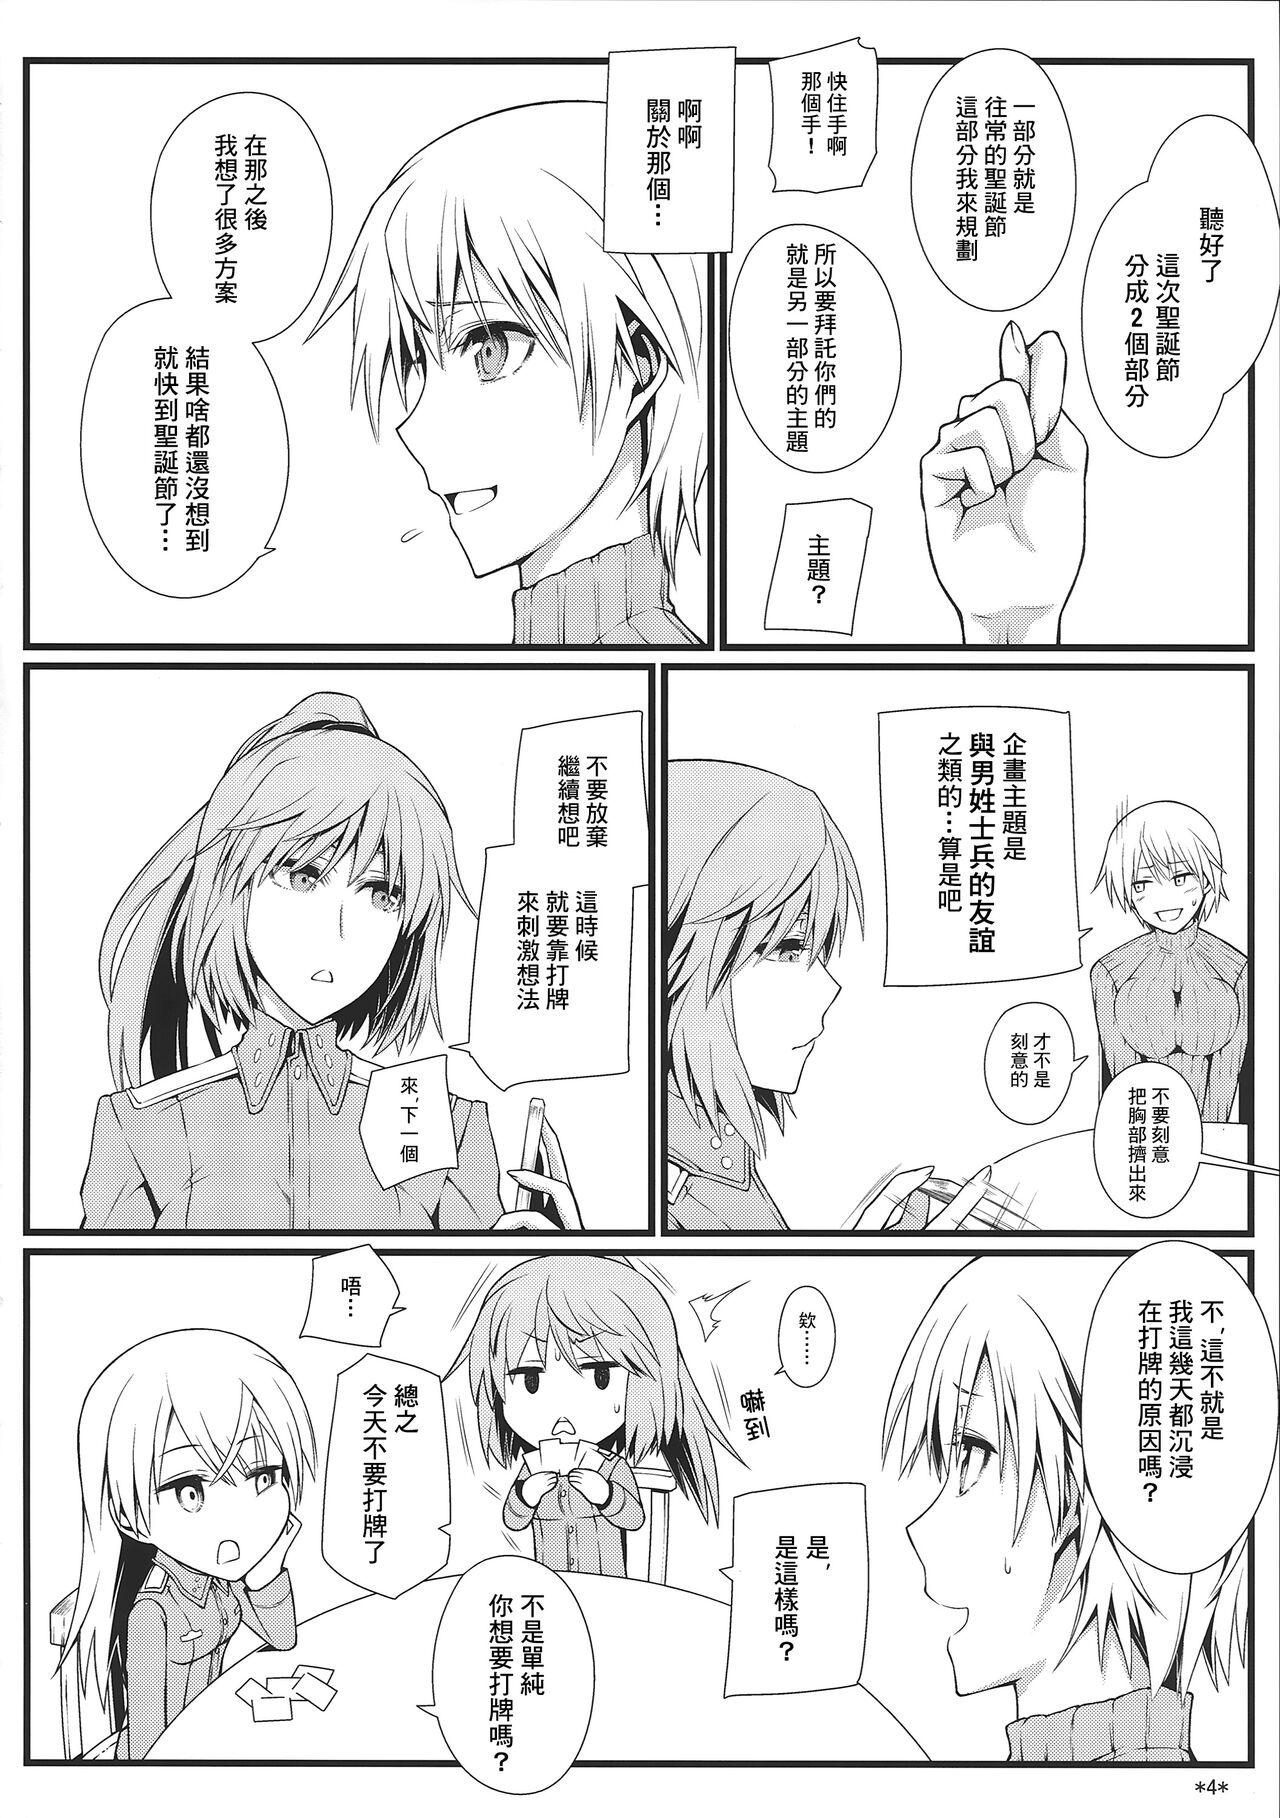 Camwhore KARLSLAND SYNDROME 3 - Strike witches Online - Page 6